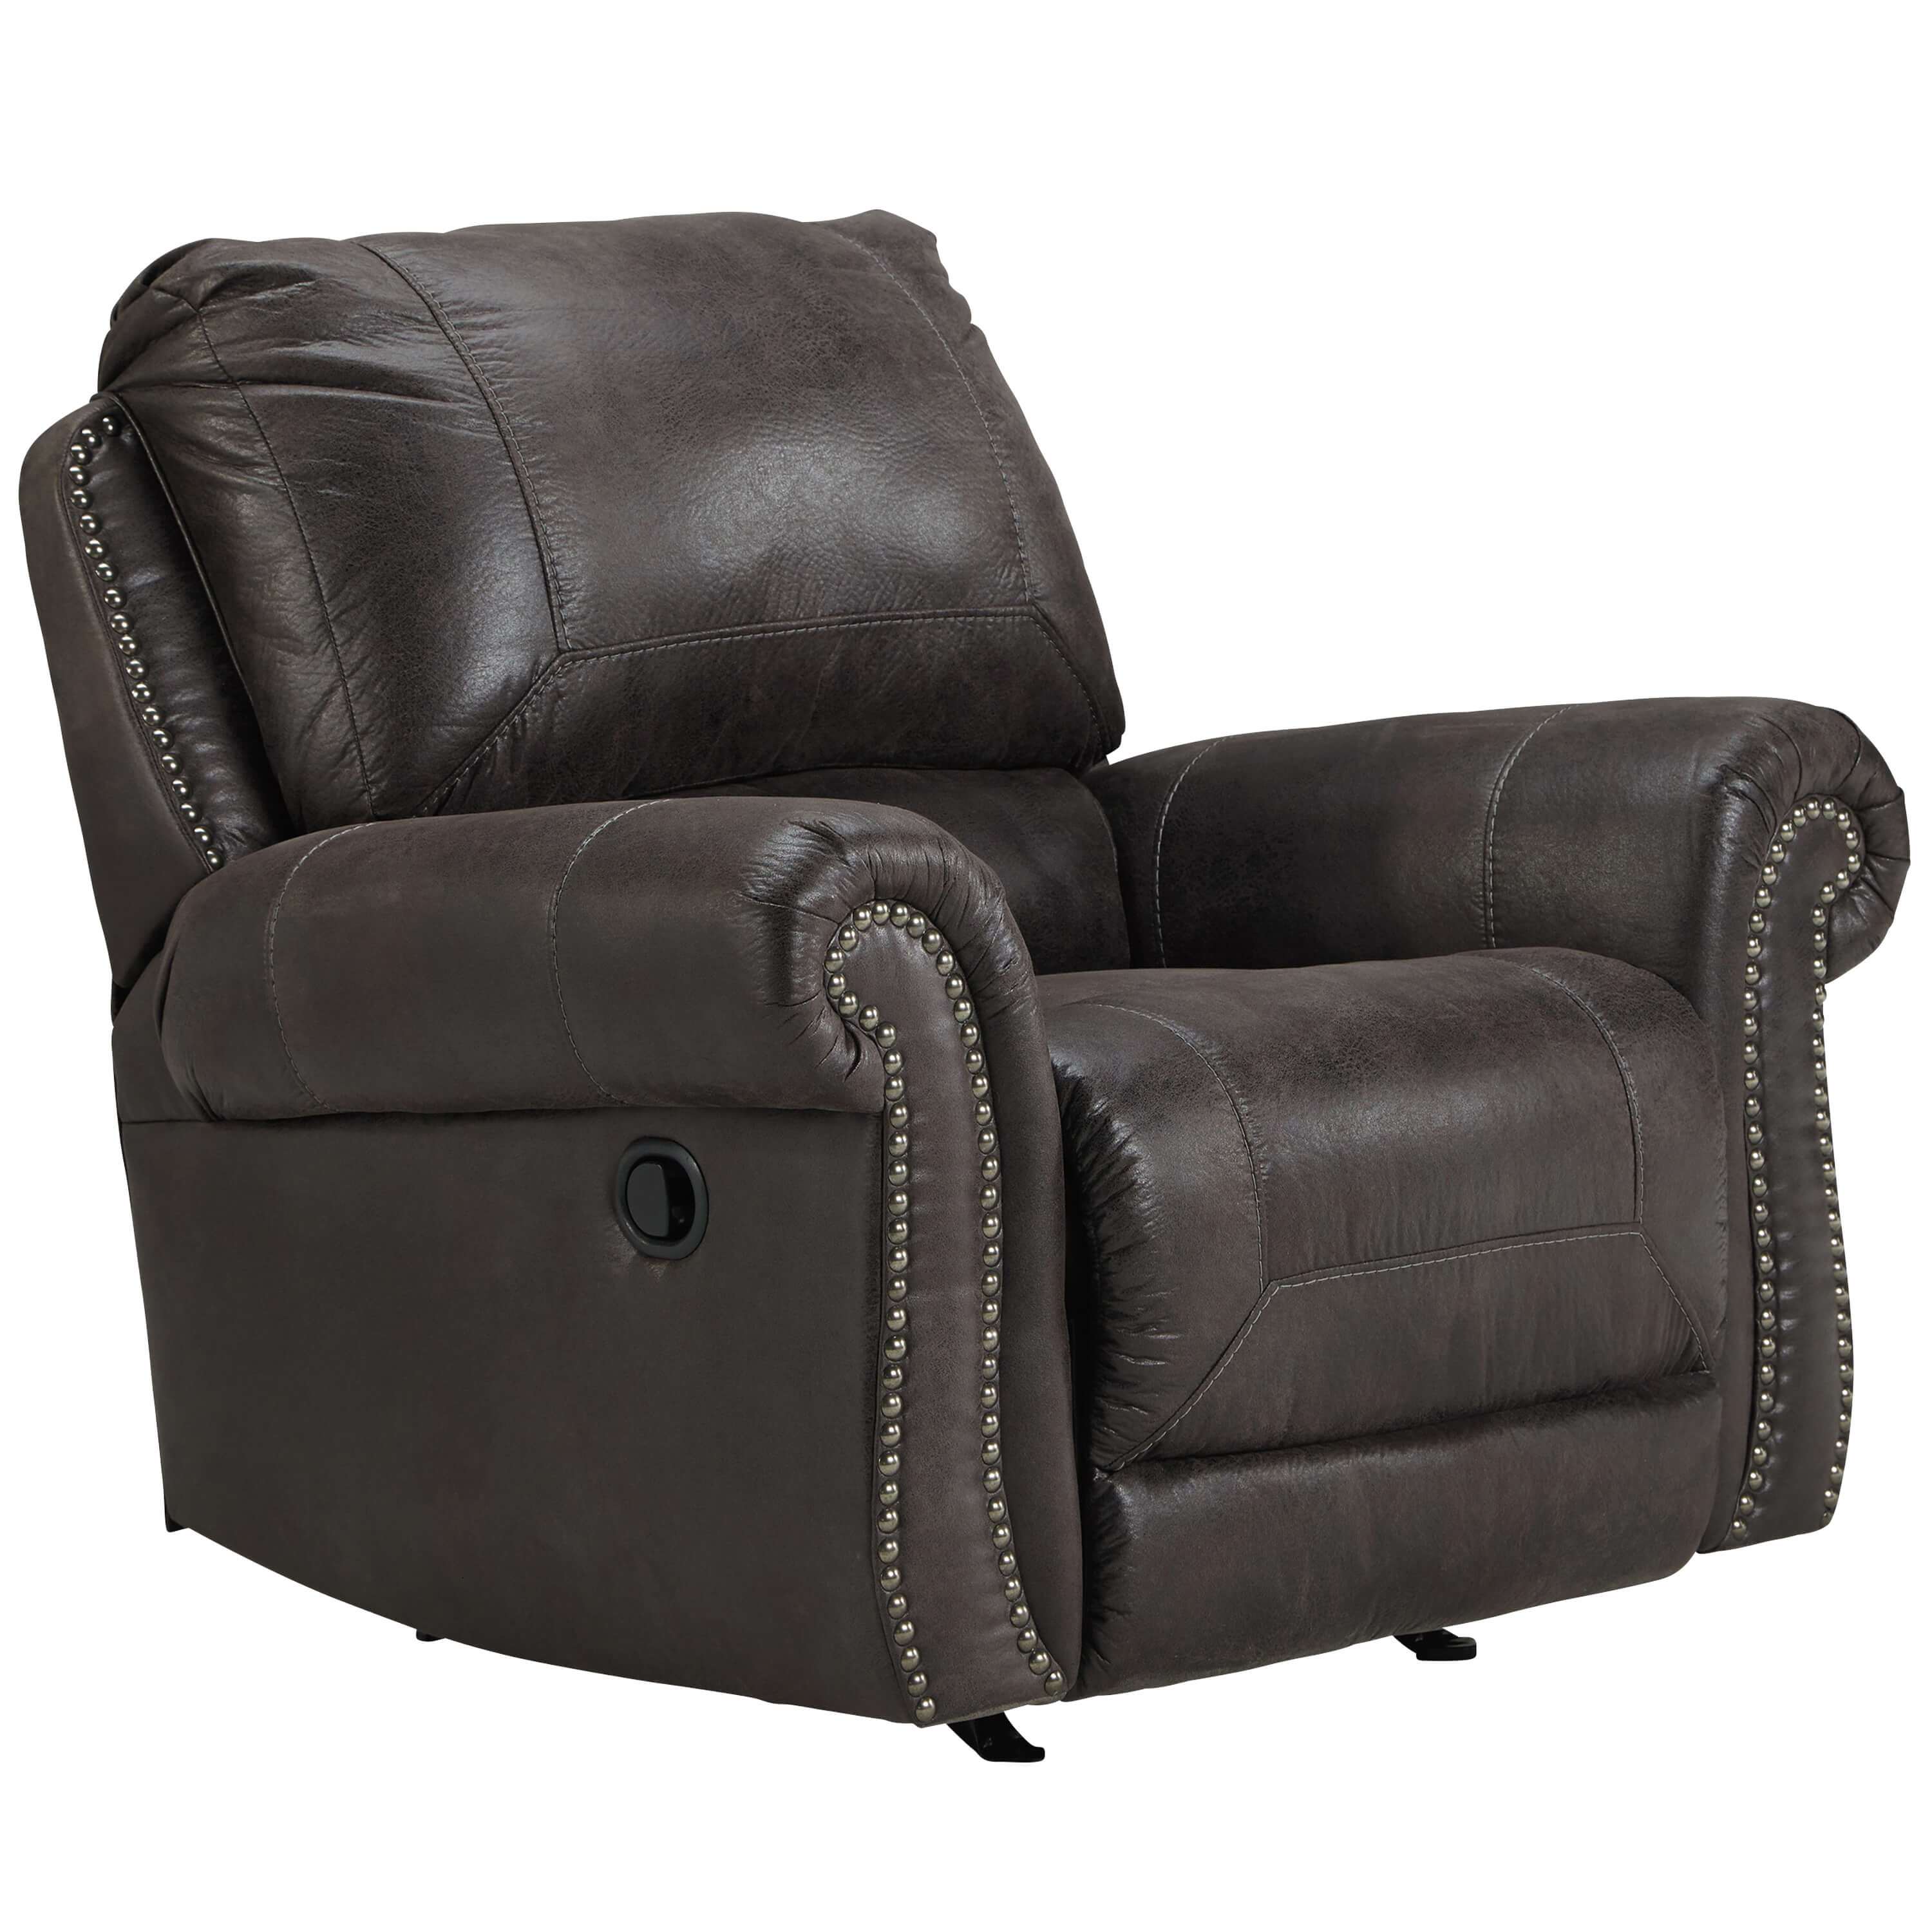 contemporary-recliners-leather-rocker-recliner.jpg